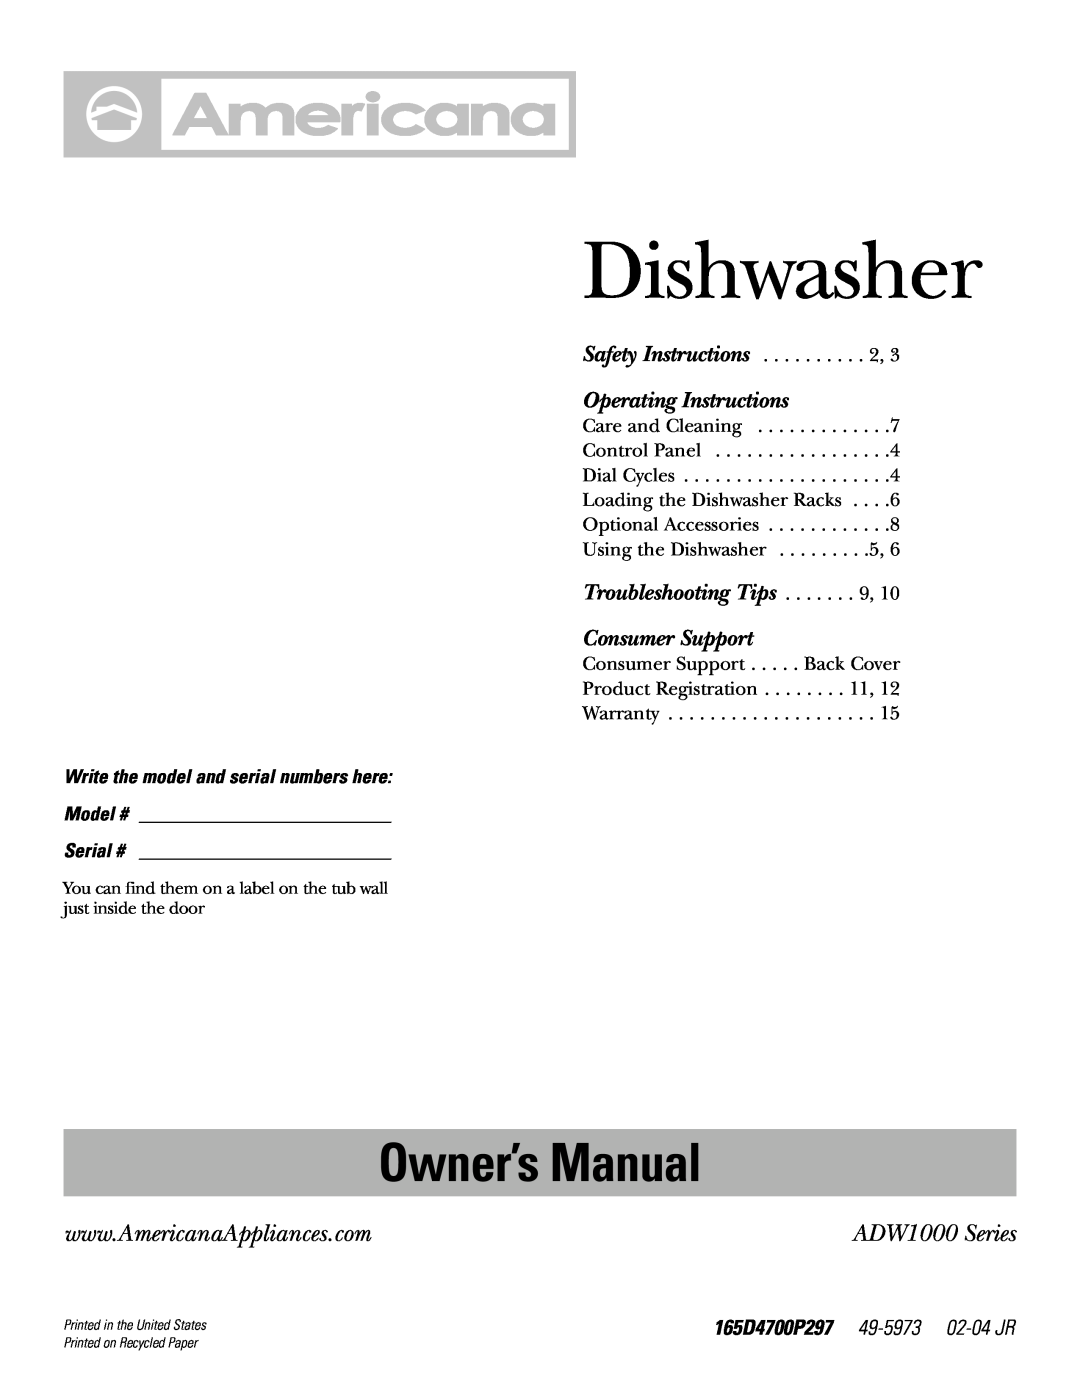 Americana Appliances ADW1000 series owner manual 165D4700P297 49-5973 02-04 JR, Dishwasher, Operating Instructions 